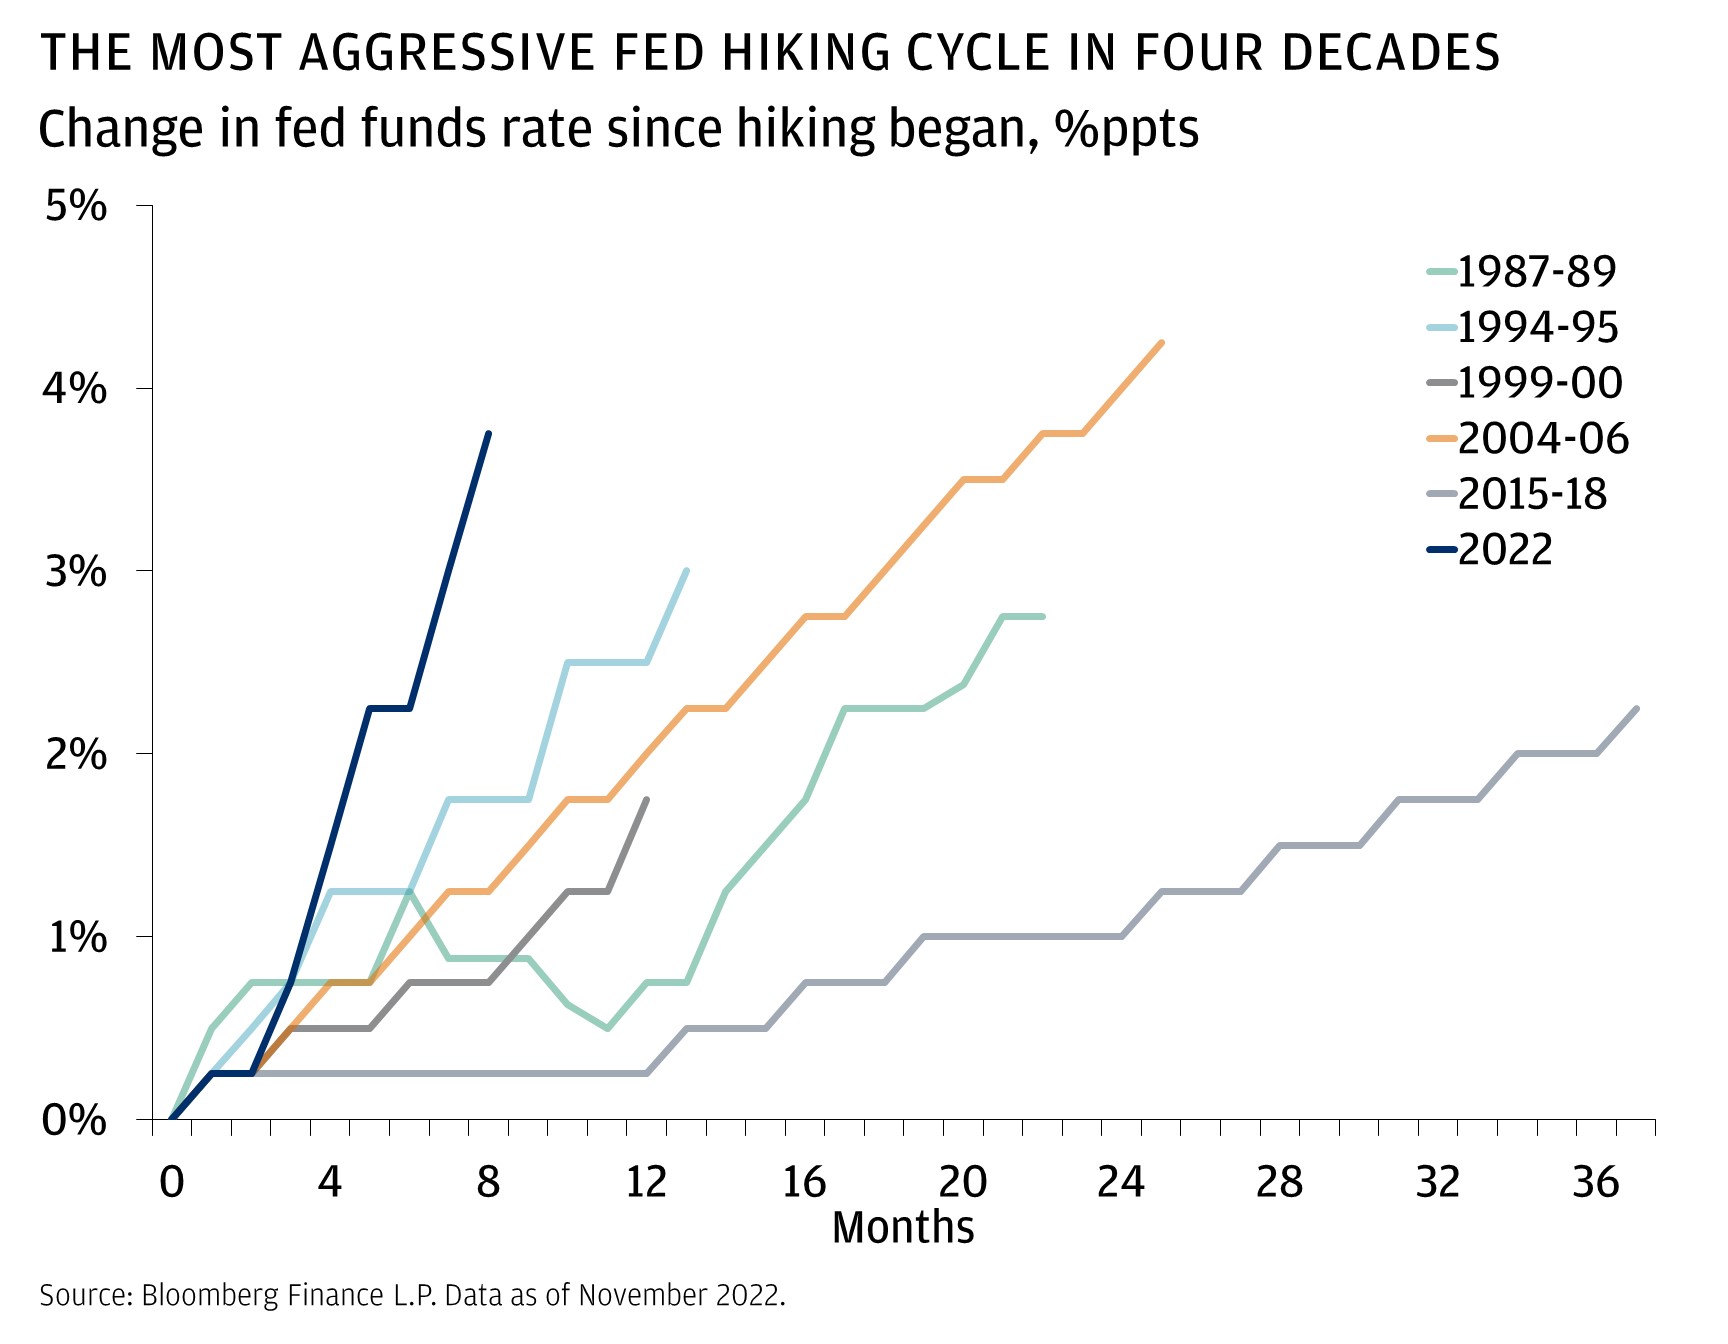 This chart shows the change in the fed funds rate per month since hiking began in six hiking cycles back to 1987.